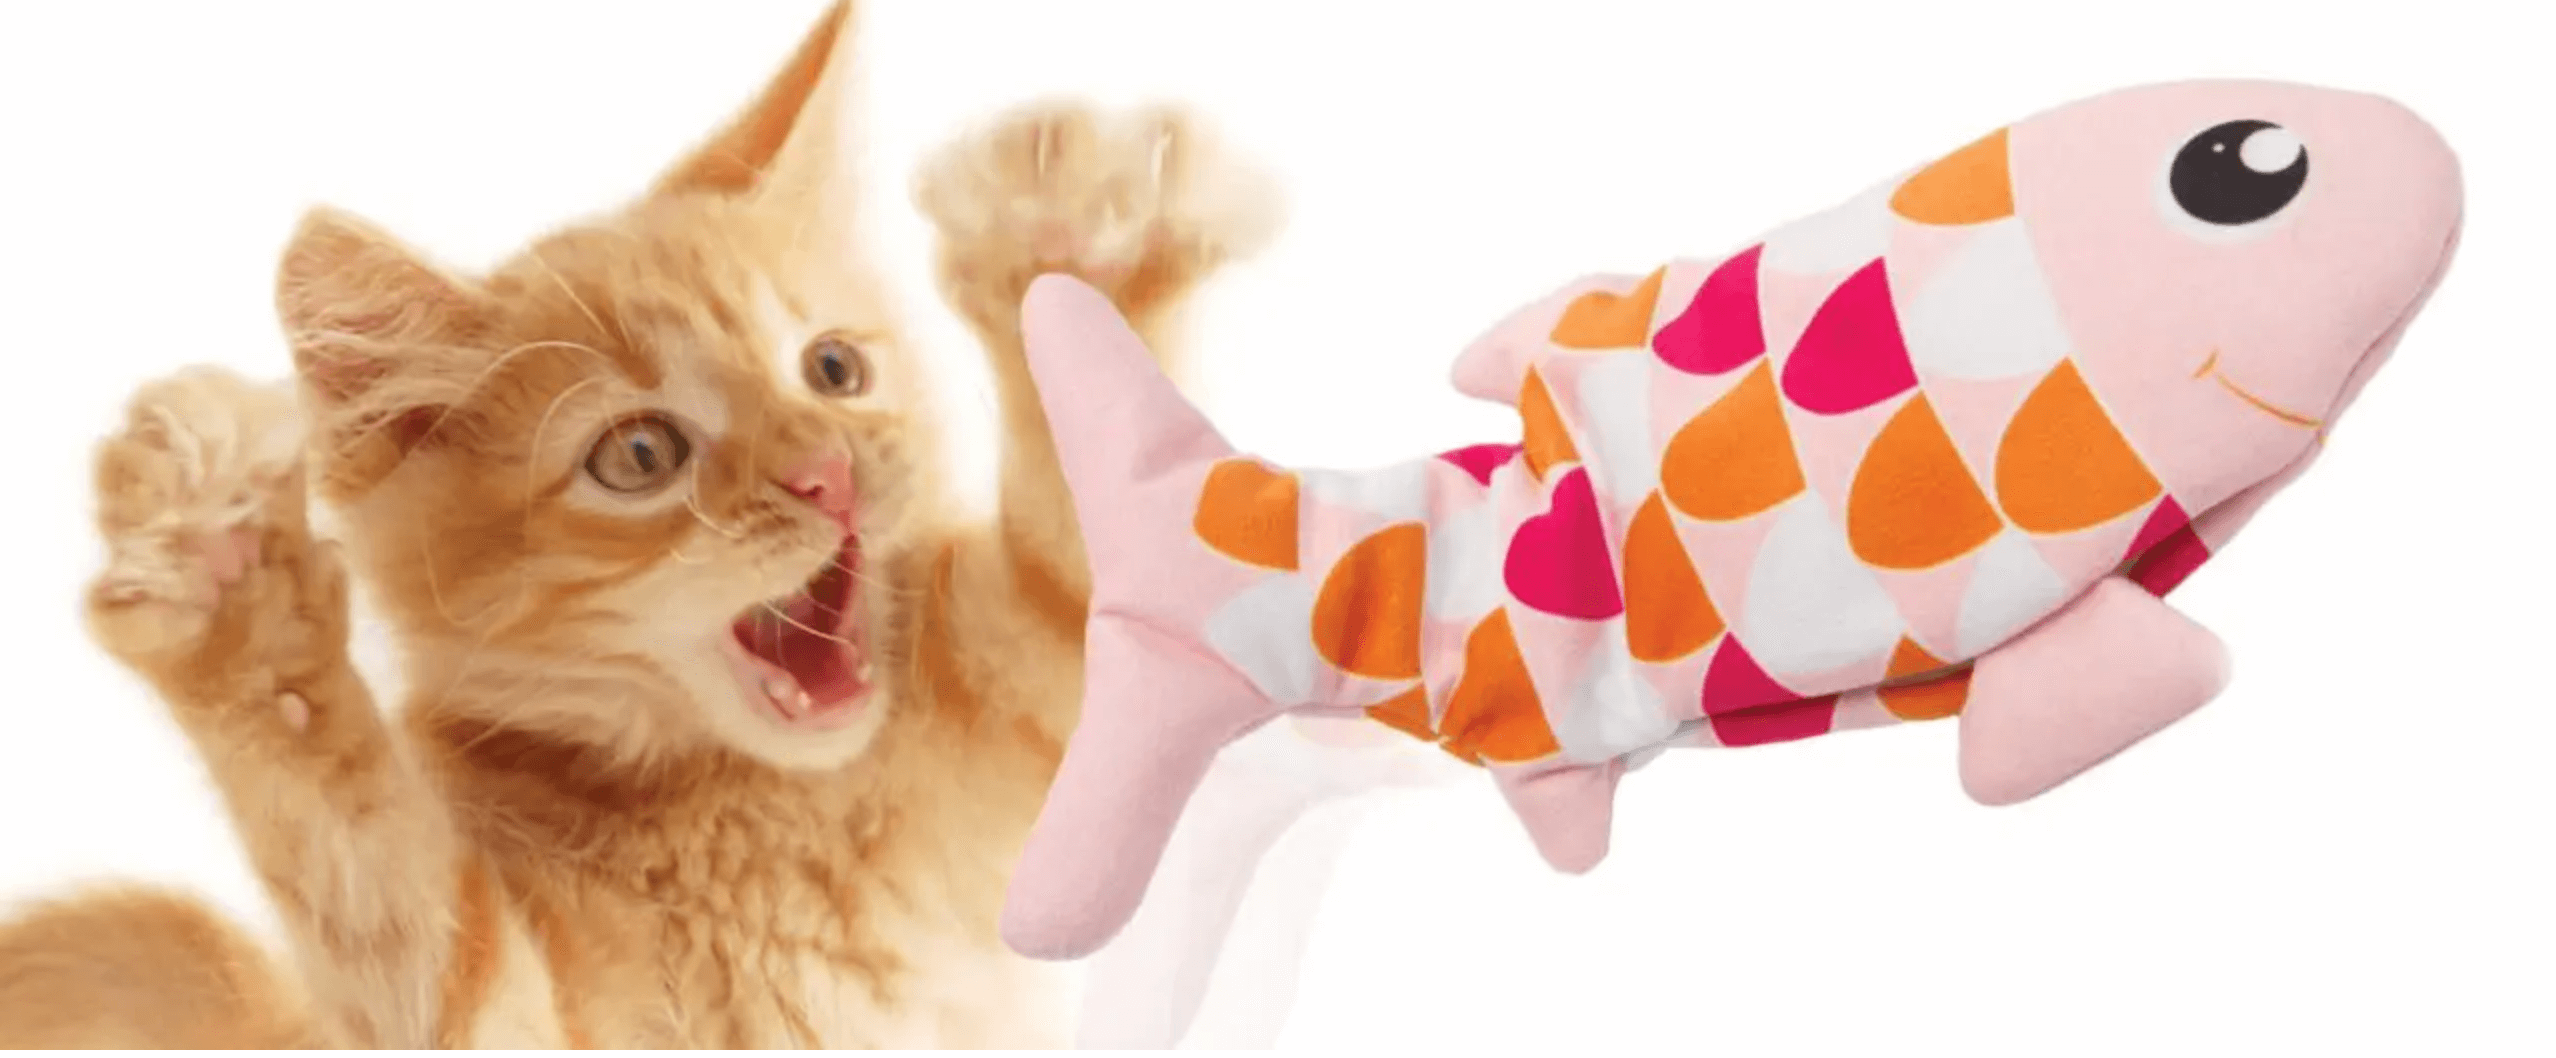 Interactive Toys Your Cats Will LOVE